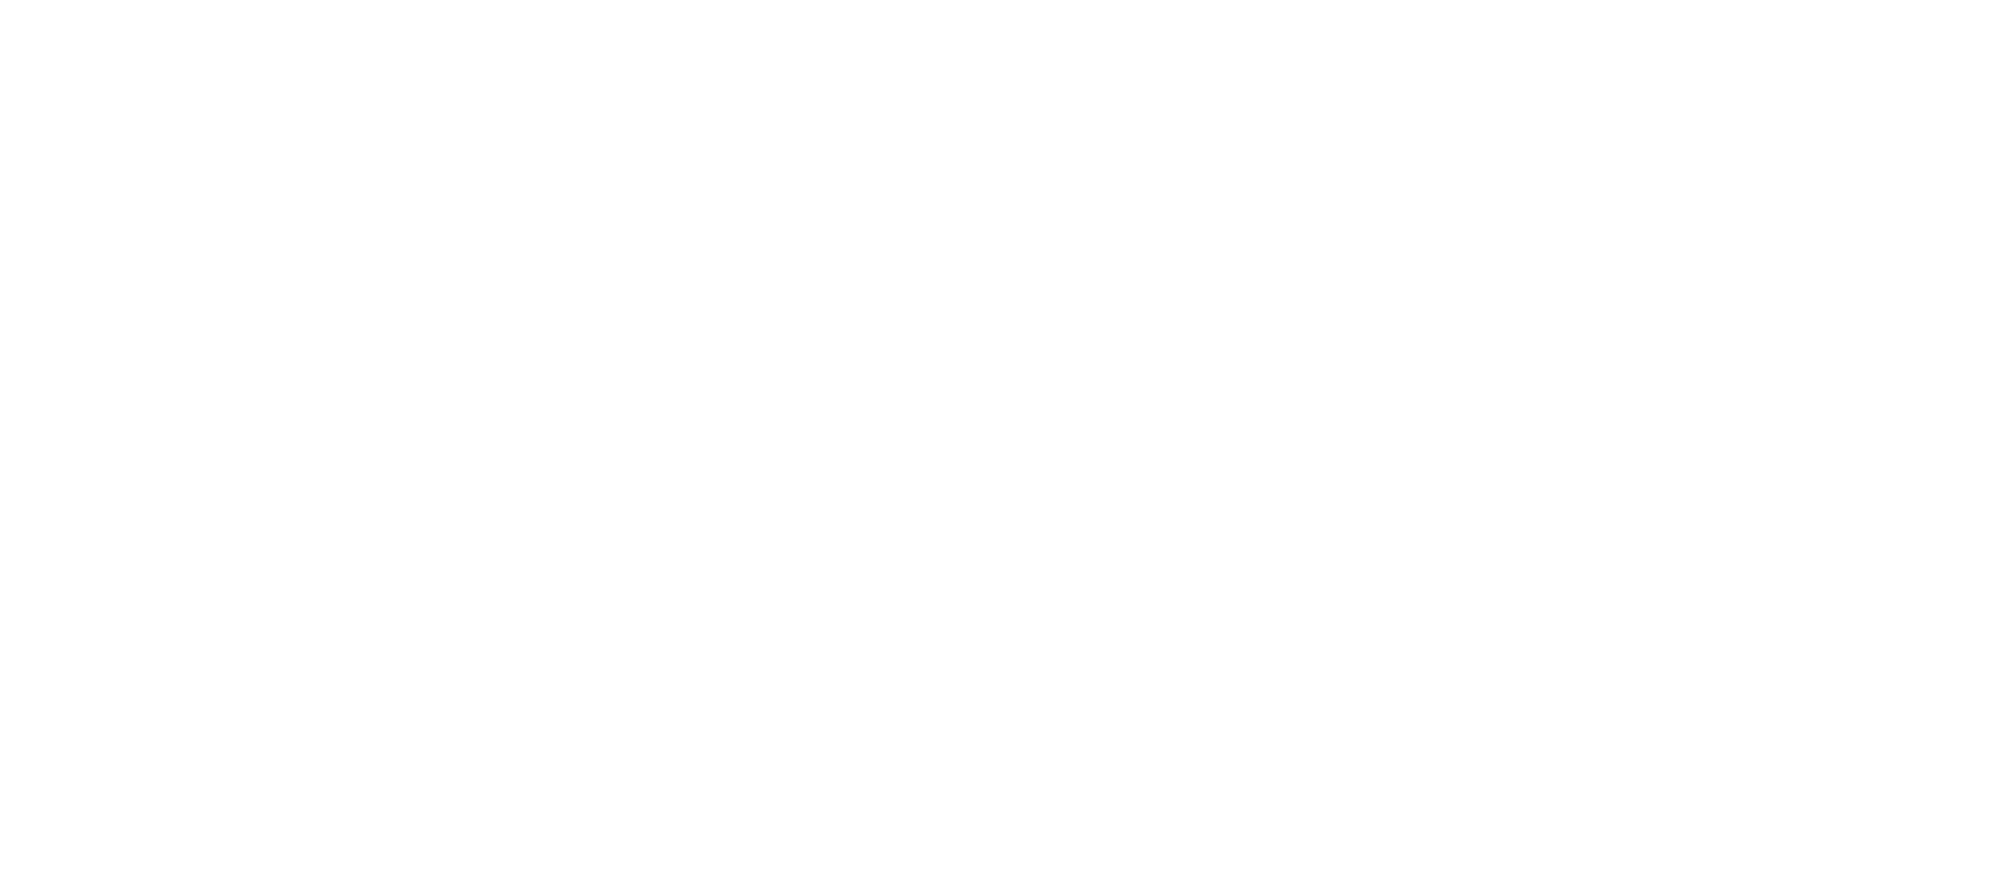 The whisky wallet.com – Shop Online Rare, Collectable and Newly released Whiskies and Fine Spirits